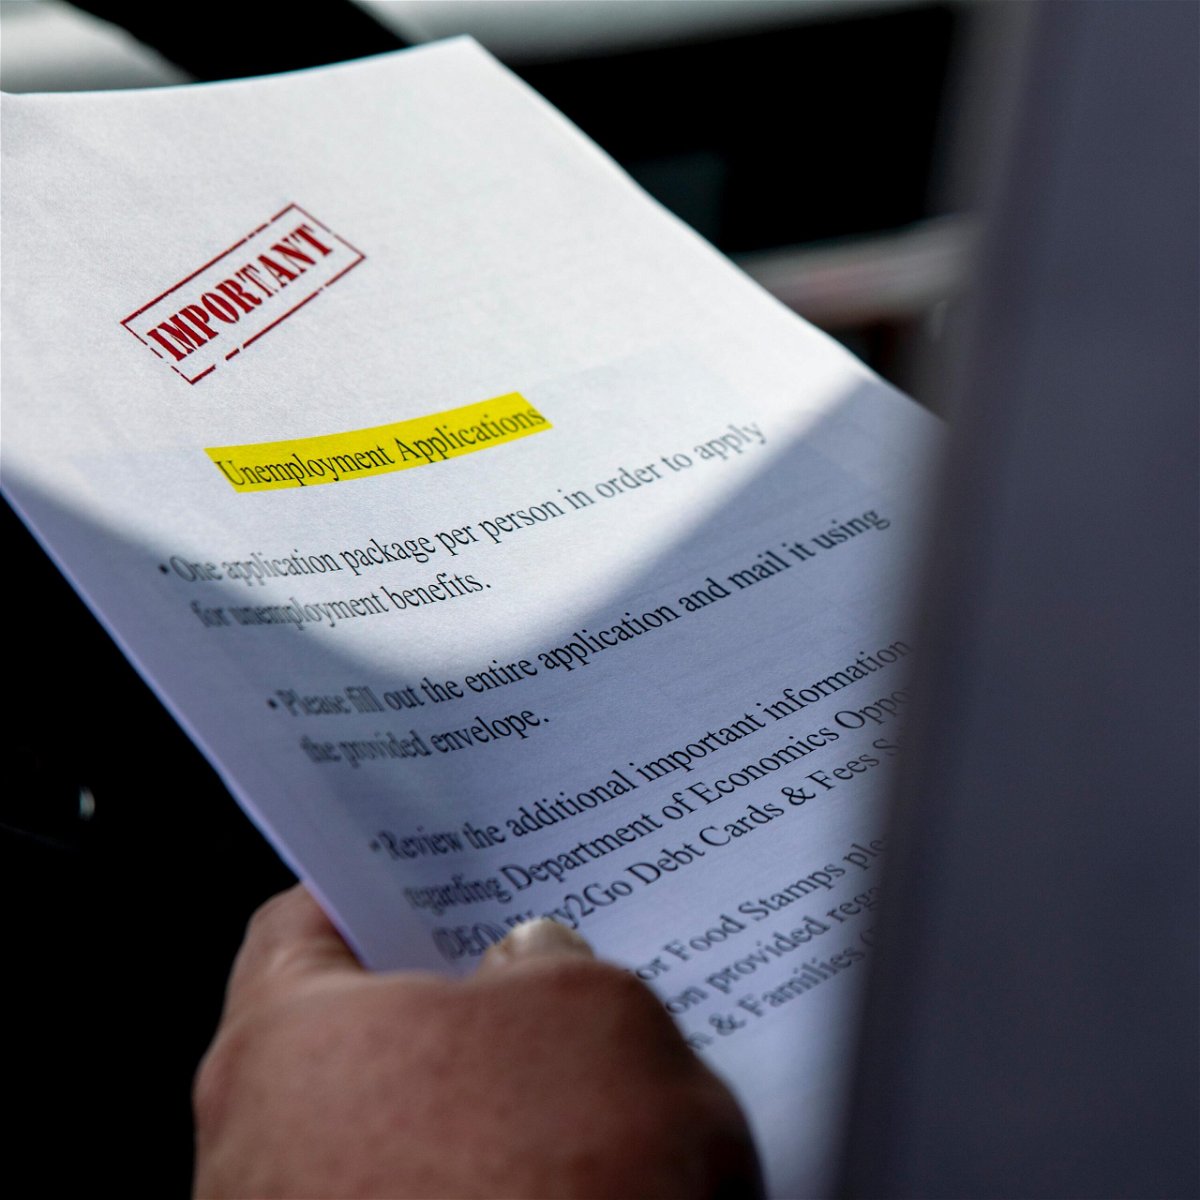 <i>Daniel A. Varela/Miami Herald/Tribune News Service/Getty Images</i><br/>A Miami-Dade County resident holds a paper unemployment form on April 7